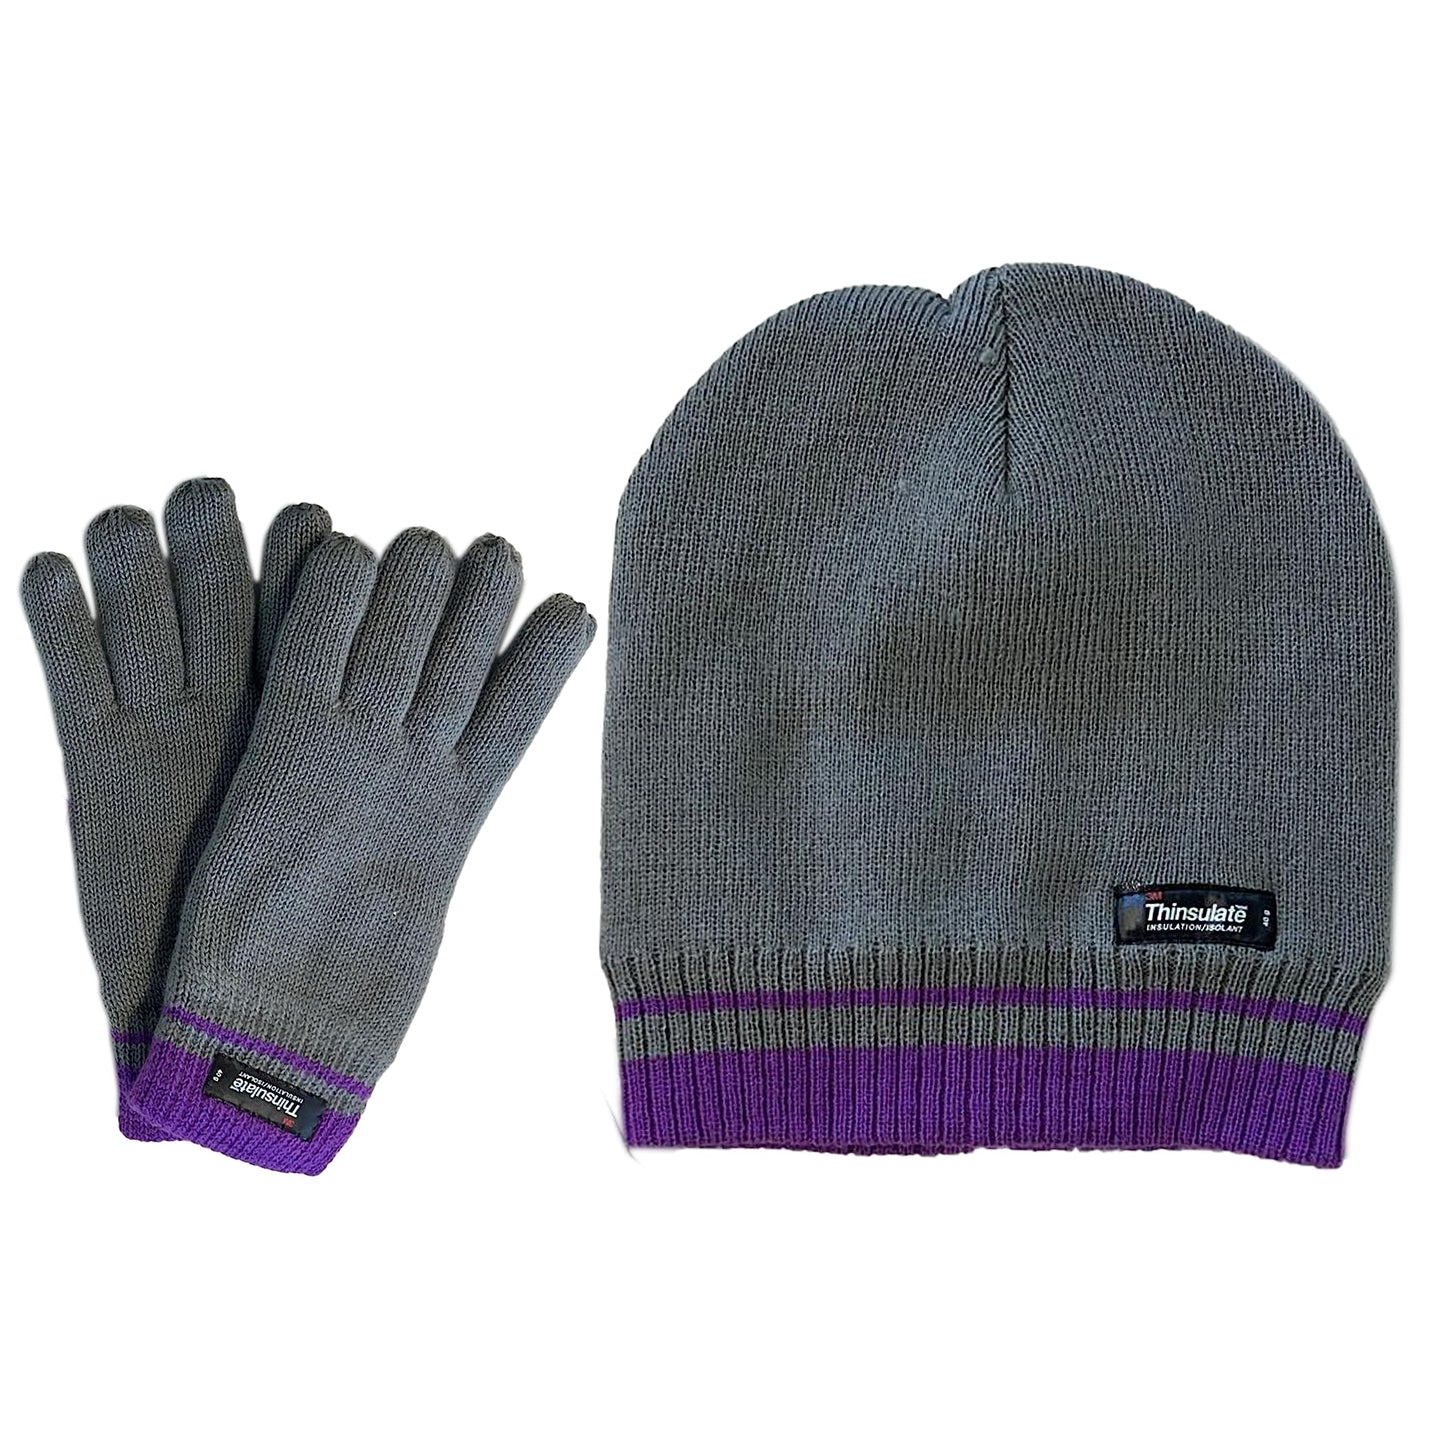 Women's Hat & Gloves Set Stripe Design With 3M Thinsulate Thermal Insulation. Buy now for £8.00. A Hats by Sock Stack. 3M, accessories, accessory, aqua, Beanie Hat, fleece, gloves, grey, hat, Hats, hot pink, insulation, Insulation Hat, Knitted, outdoor, p